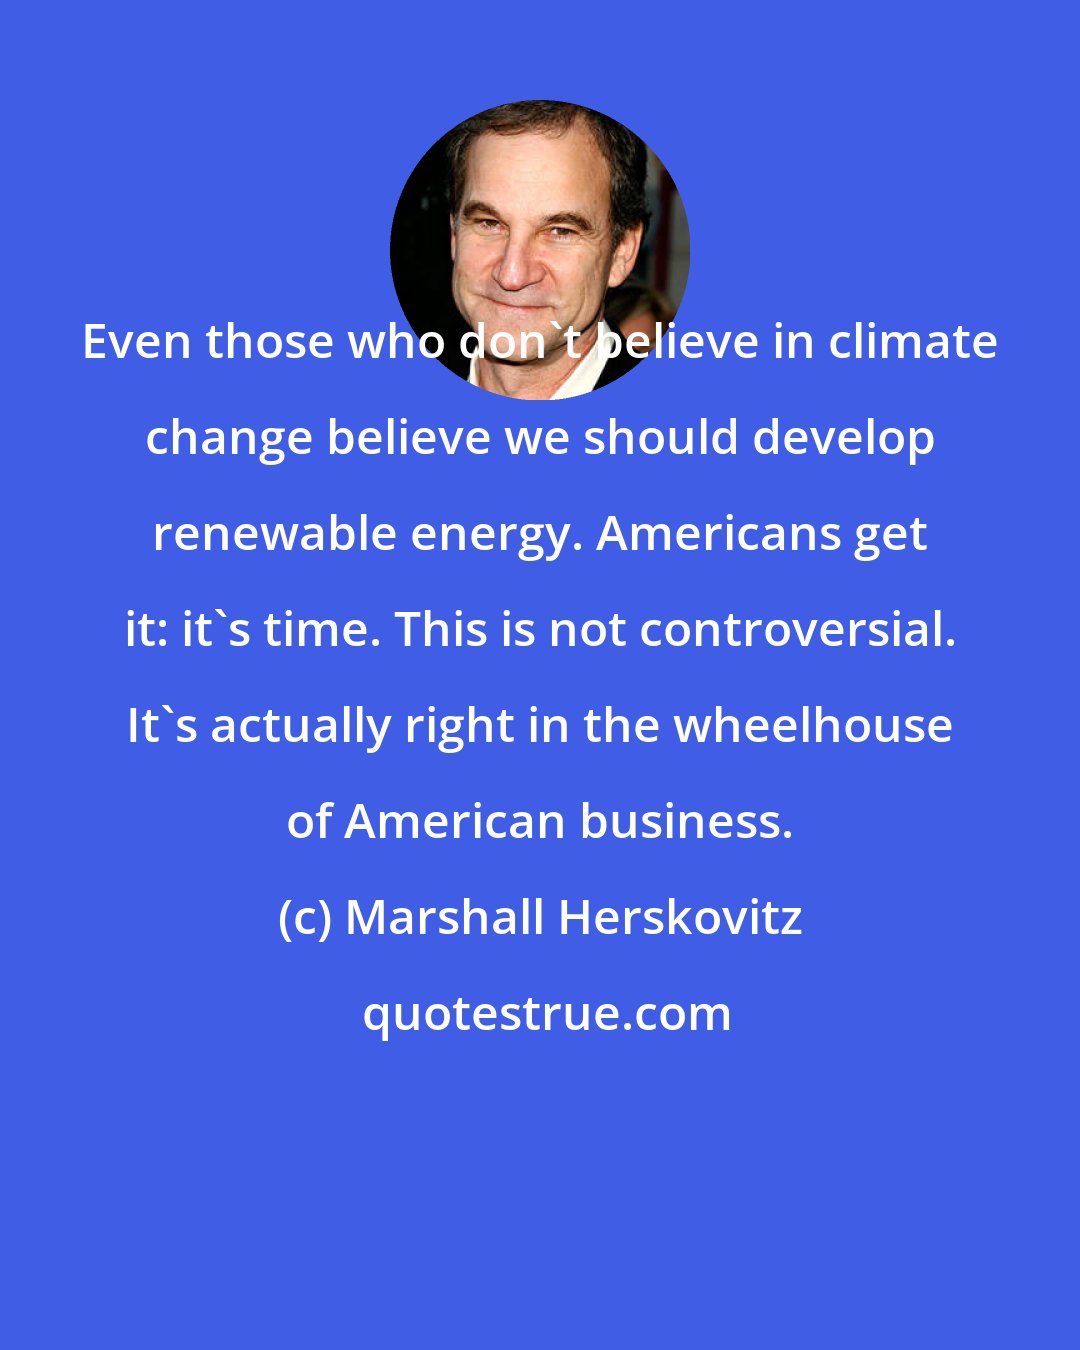 Marshall Herskovitz: Even those who don't believe in climate change believe we should develop renewable energy. Americans get it: it's time. This is not controversial. It's actually right in the wheelhouse of American business.